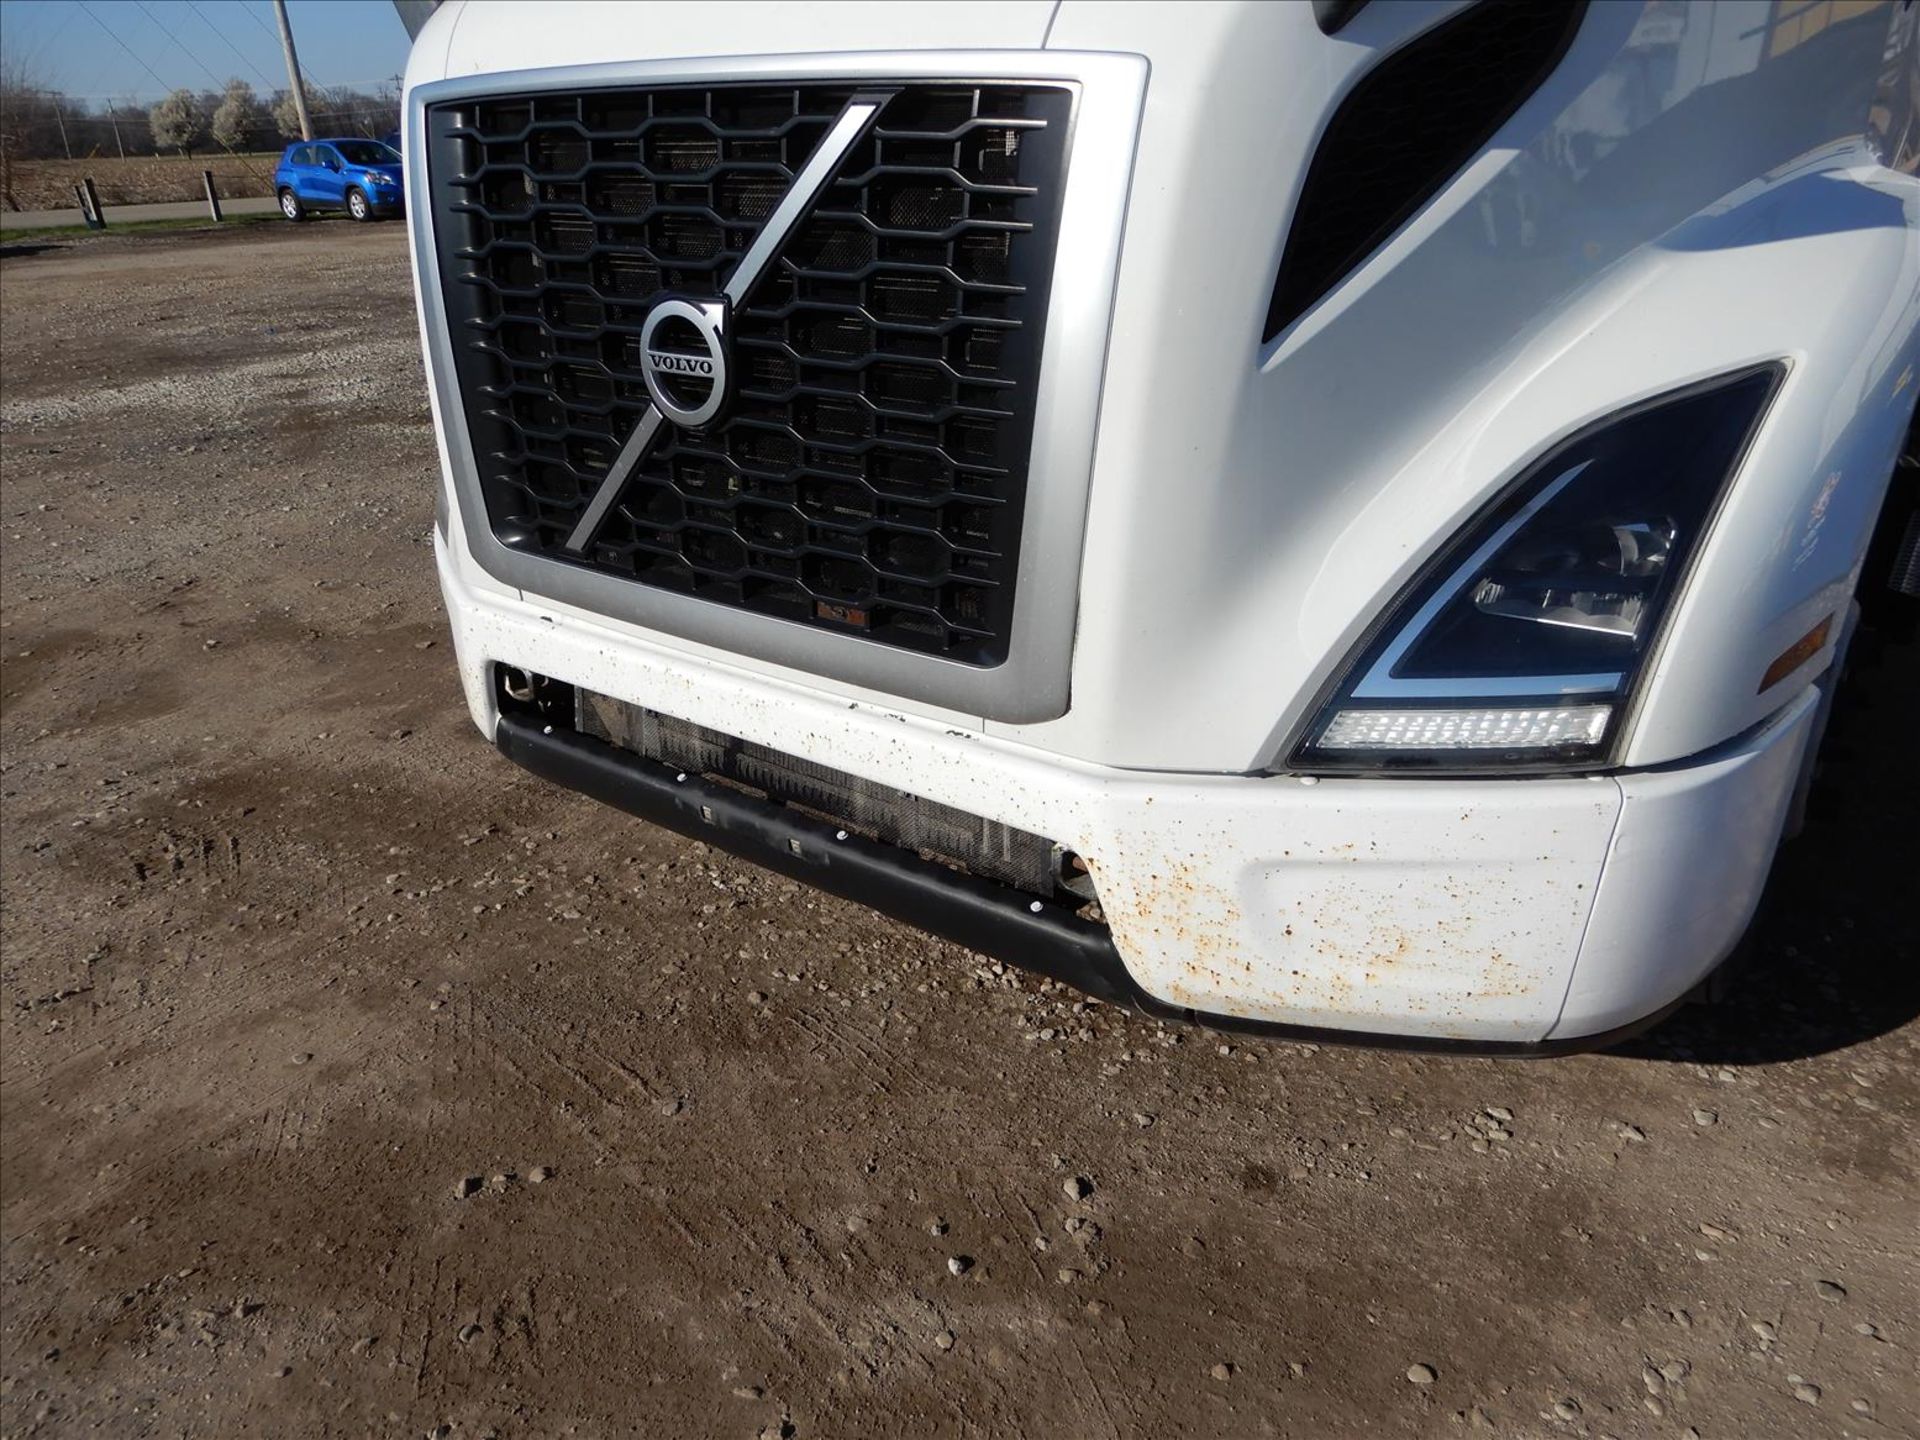 2019 Volvo VNR 300 Daycab Truck Tractor - Located in Indianapolis, IN - Image 45 of 61